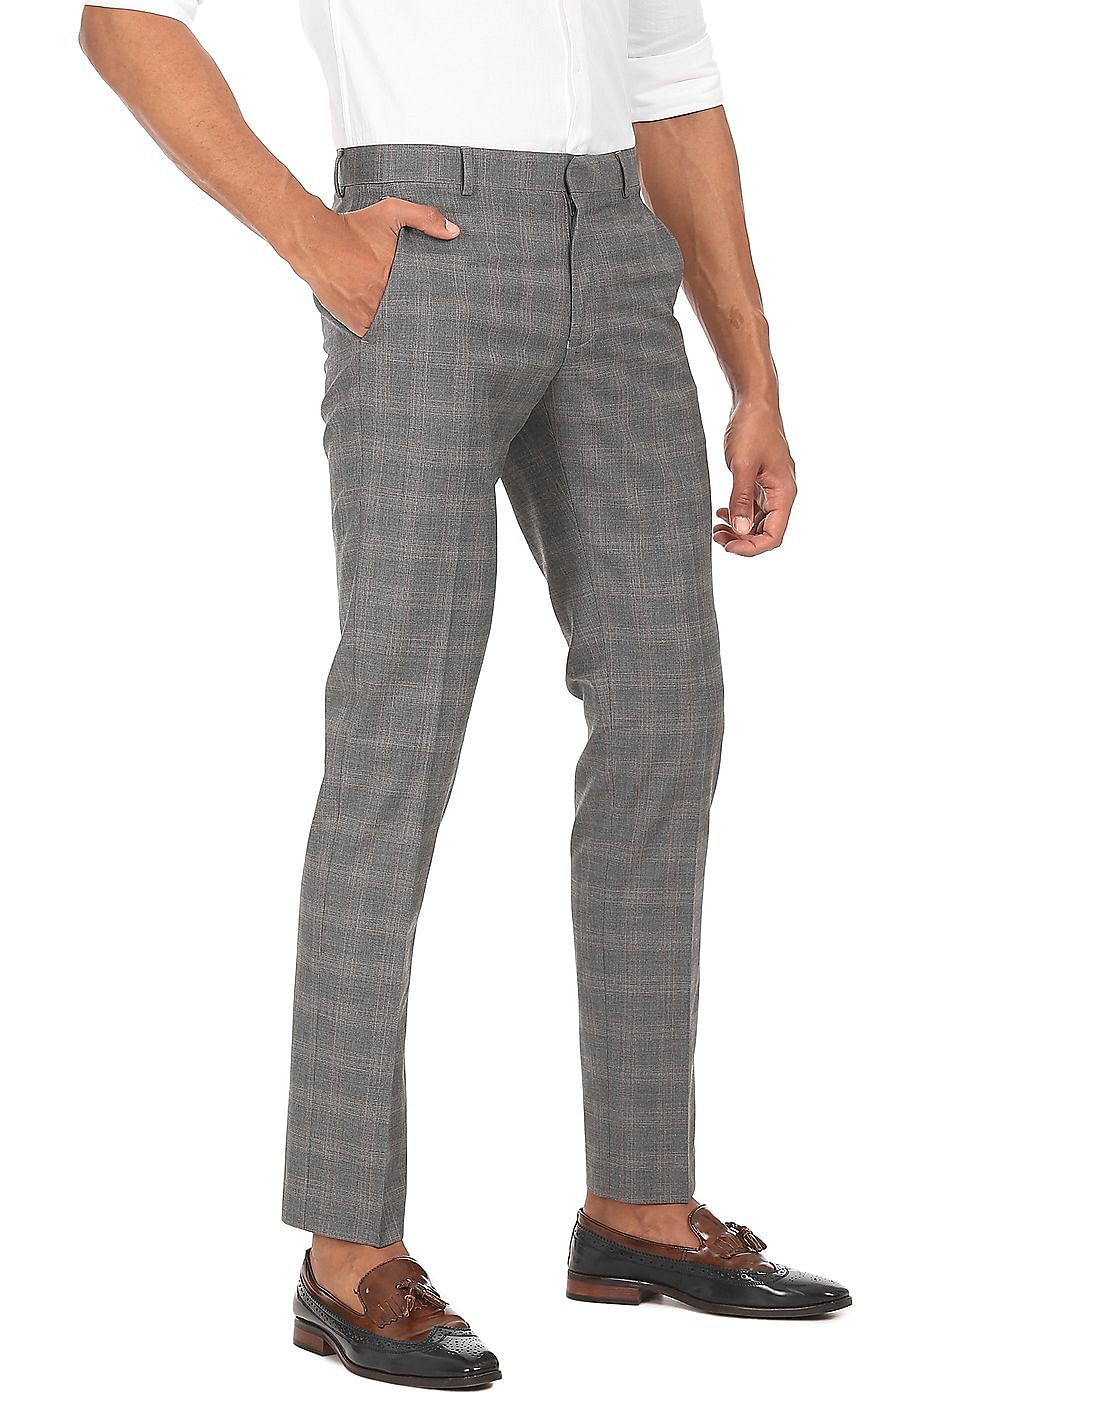 Buy online Black Checkered Chinos Casual Trouser from Bottom Wear for Men  by Vmart for 689 at 37 off  2023 Limeroadcom